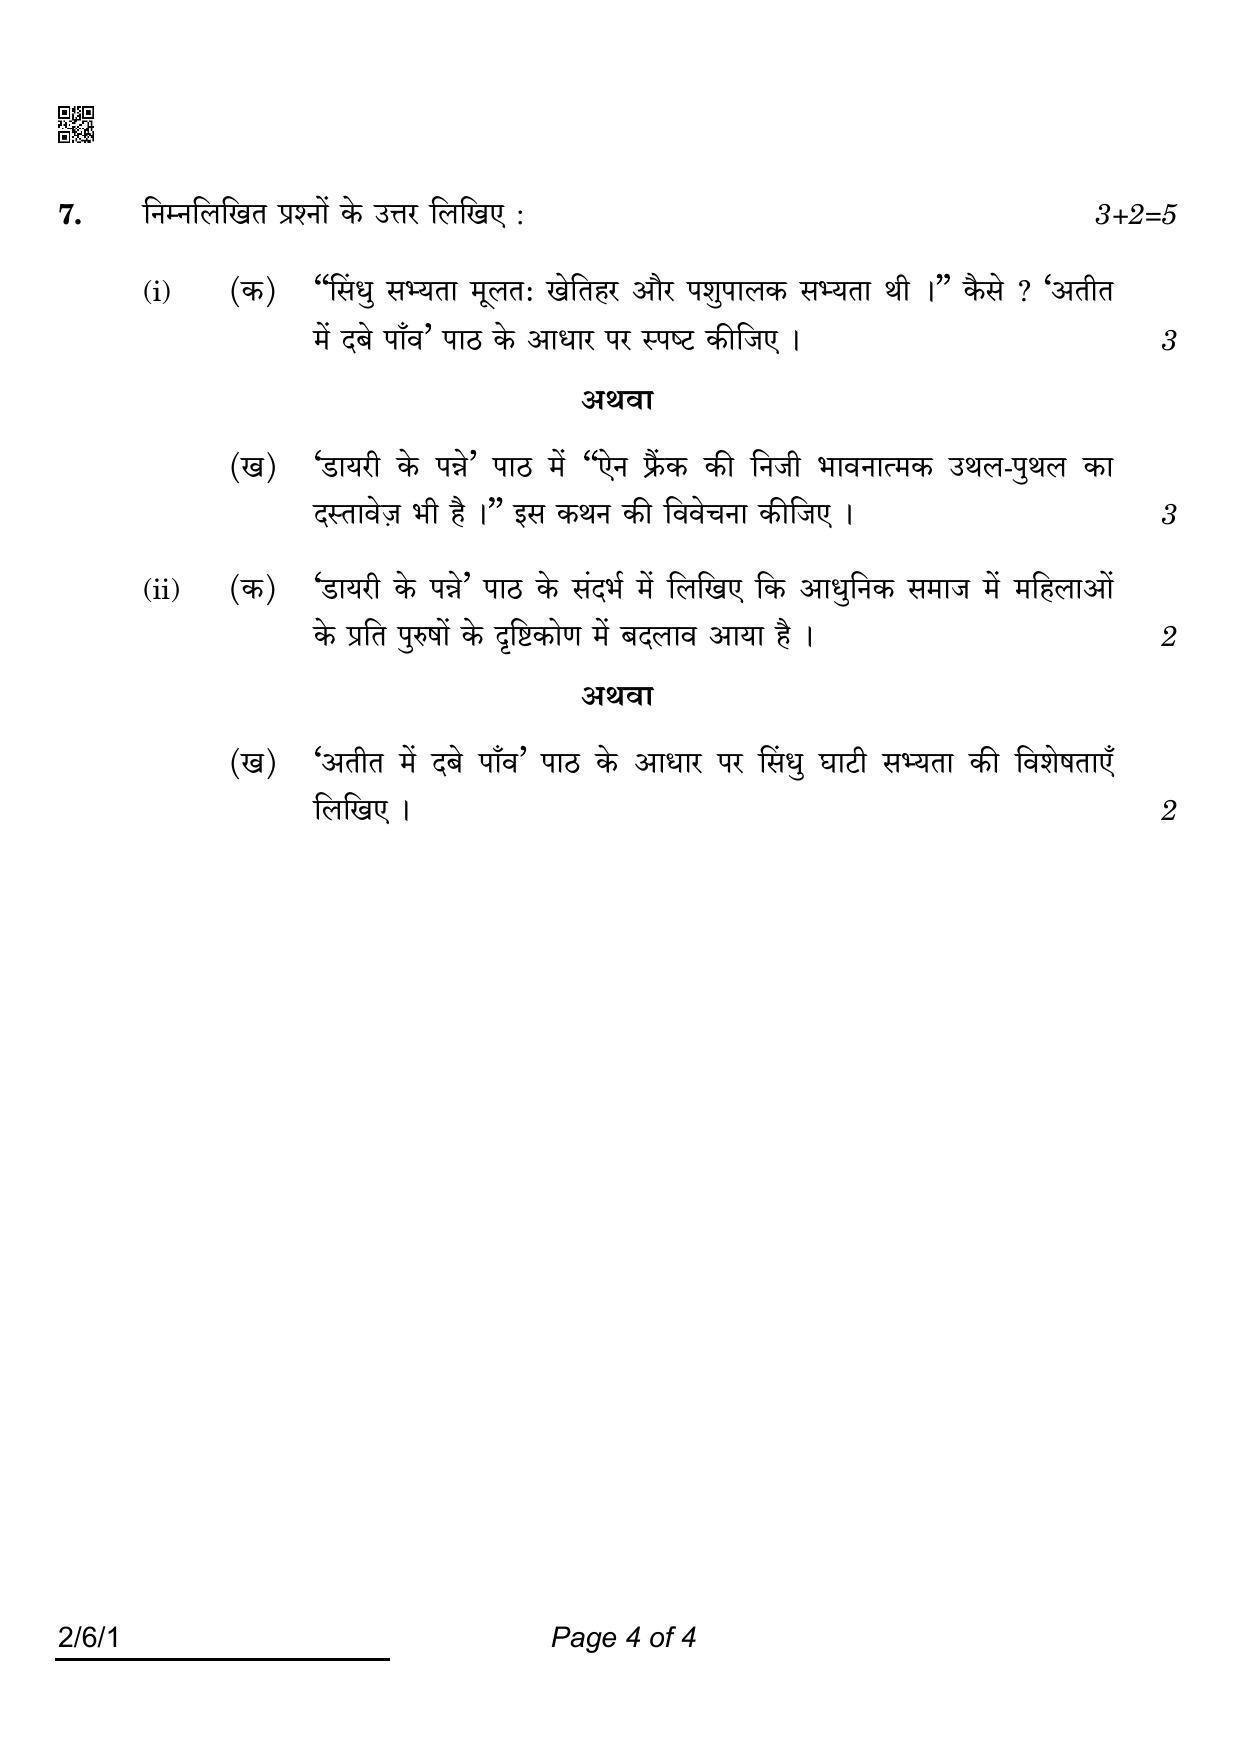 CBSE Class 12 2-6-1 Hindi Core 2022 Compartment Question Paper - Page 4